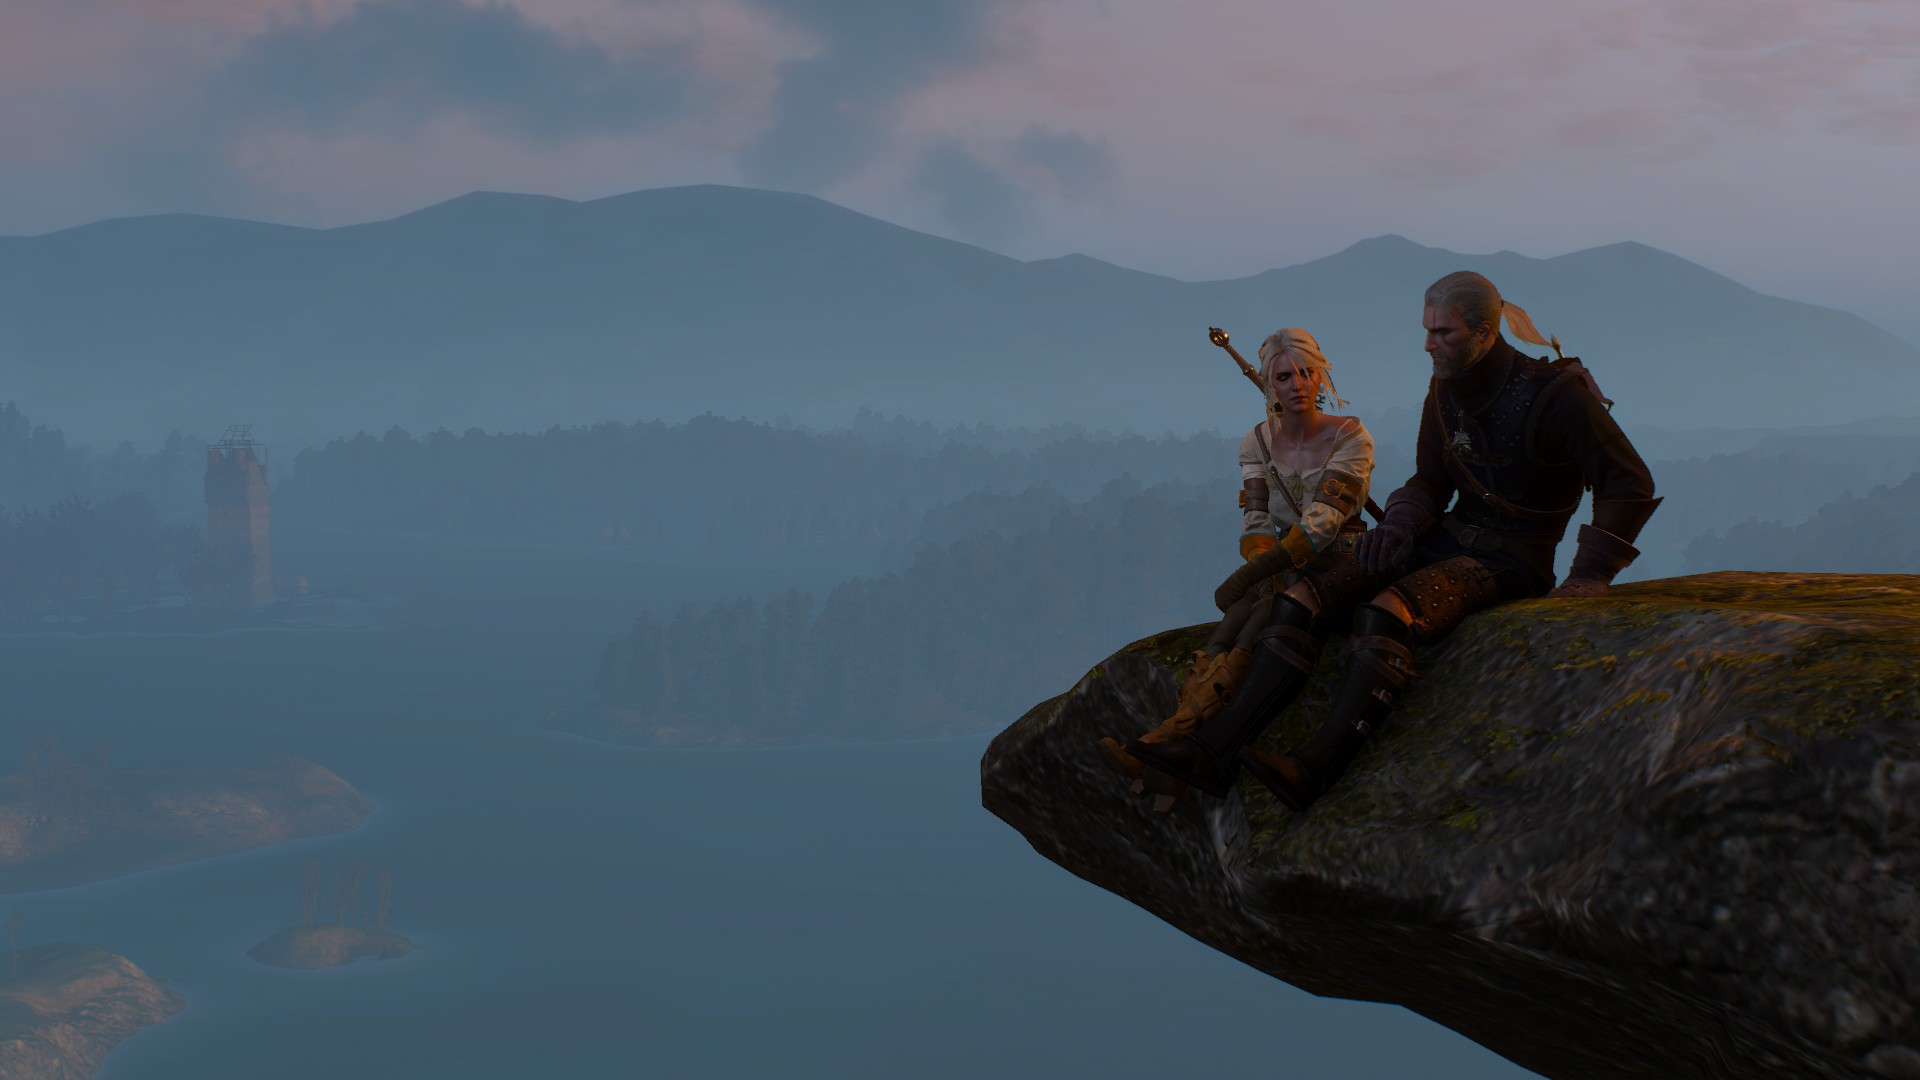 The Witcher The Witcher 3 Wild Hunt Geralt Of Rivia Ciri The Witcher Ciri Cirilla Cirilla Fiona Elen 1920x1080